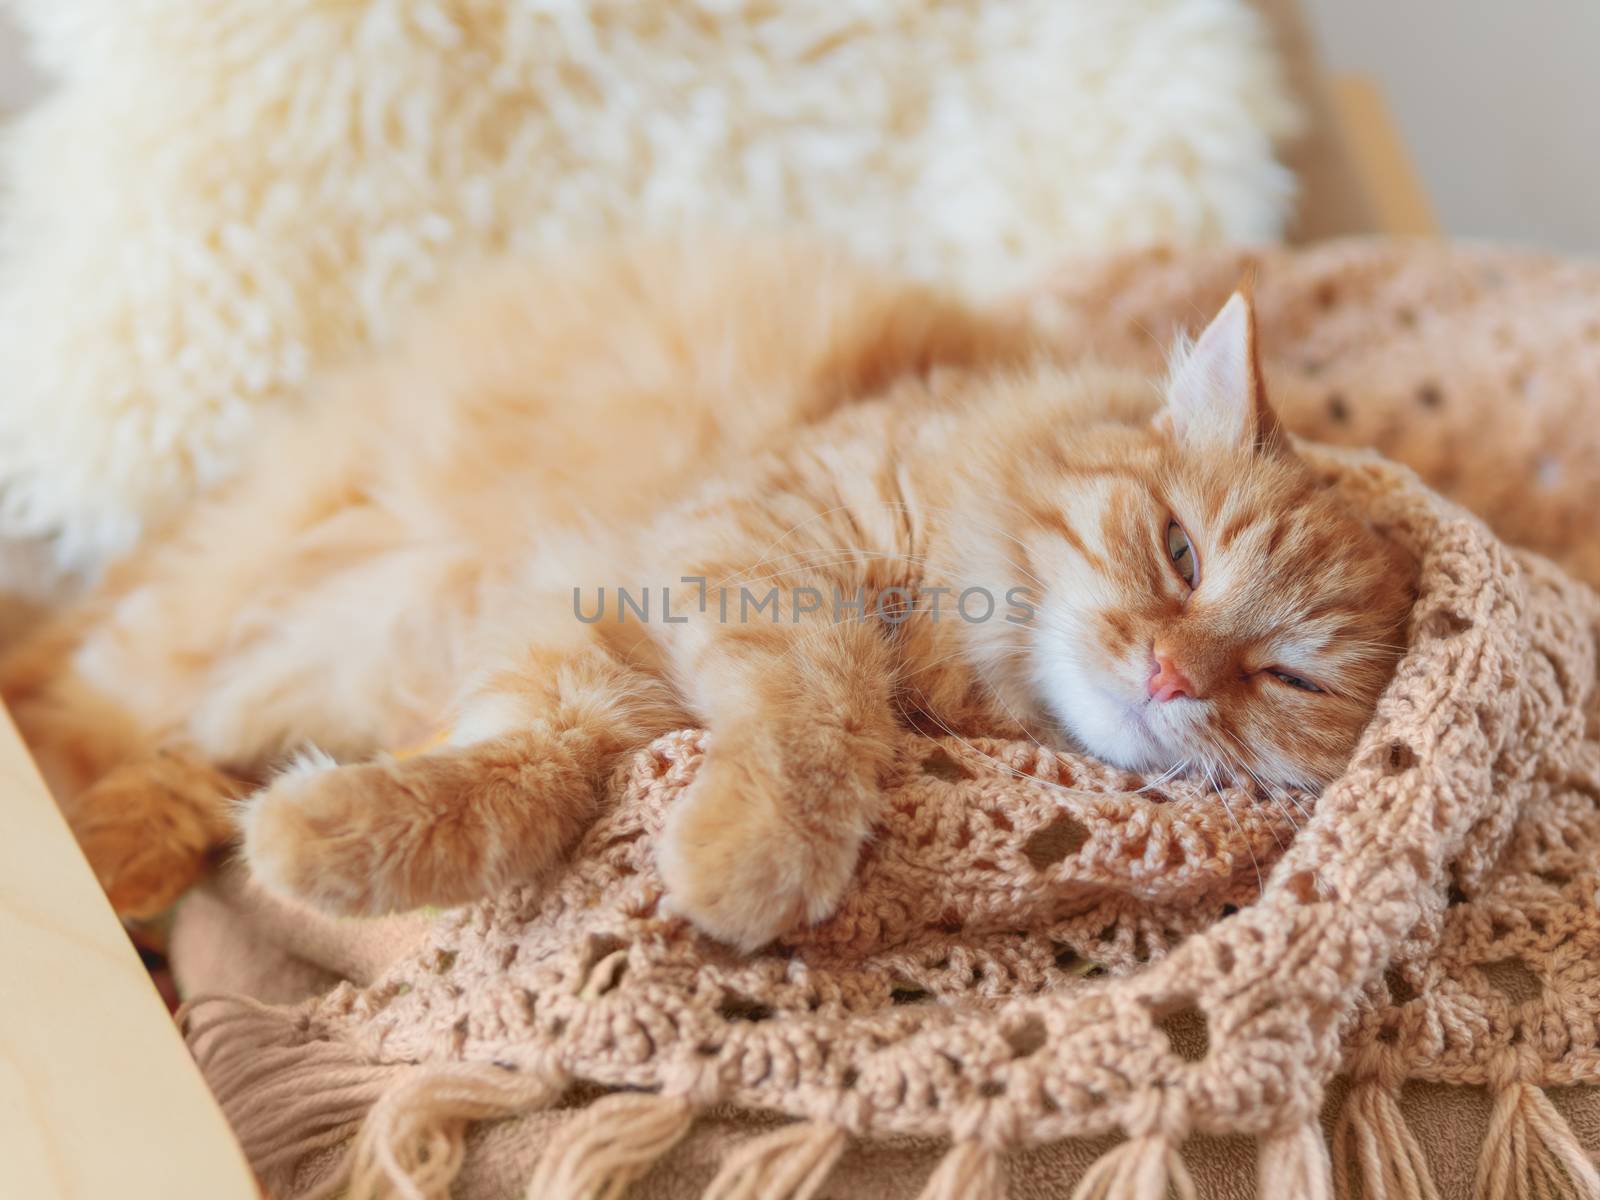 Cute ginger cat sleeping on pile of clothes. Fluffy pet mimics the color of textile.